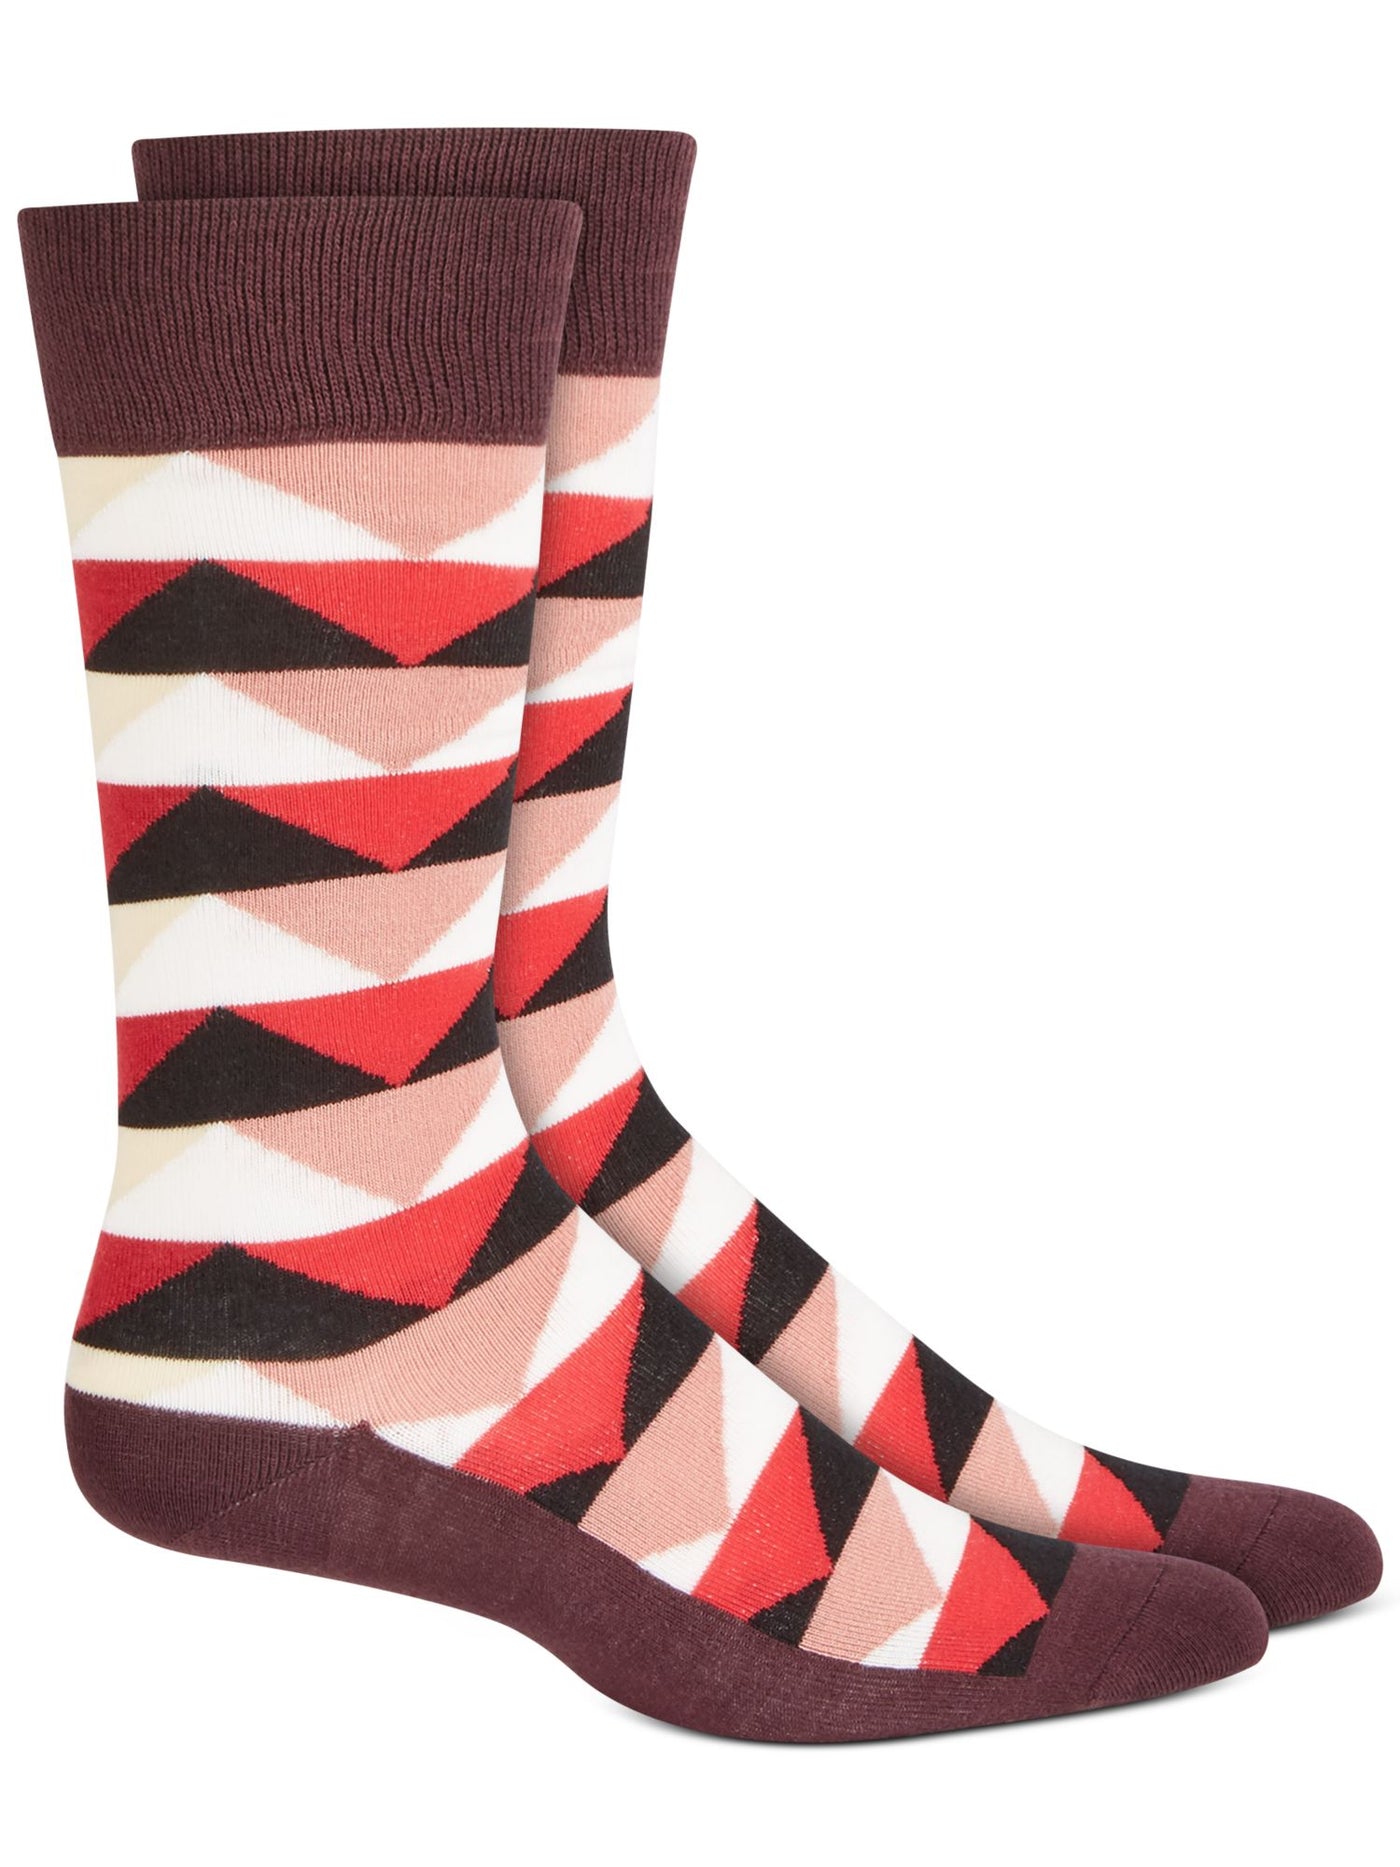 ALFATECH BY ALFANI Red Patterned Moisture-Wicking Seamless Colorful Dress Over The Calf Socks 7-12